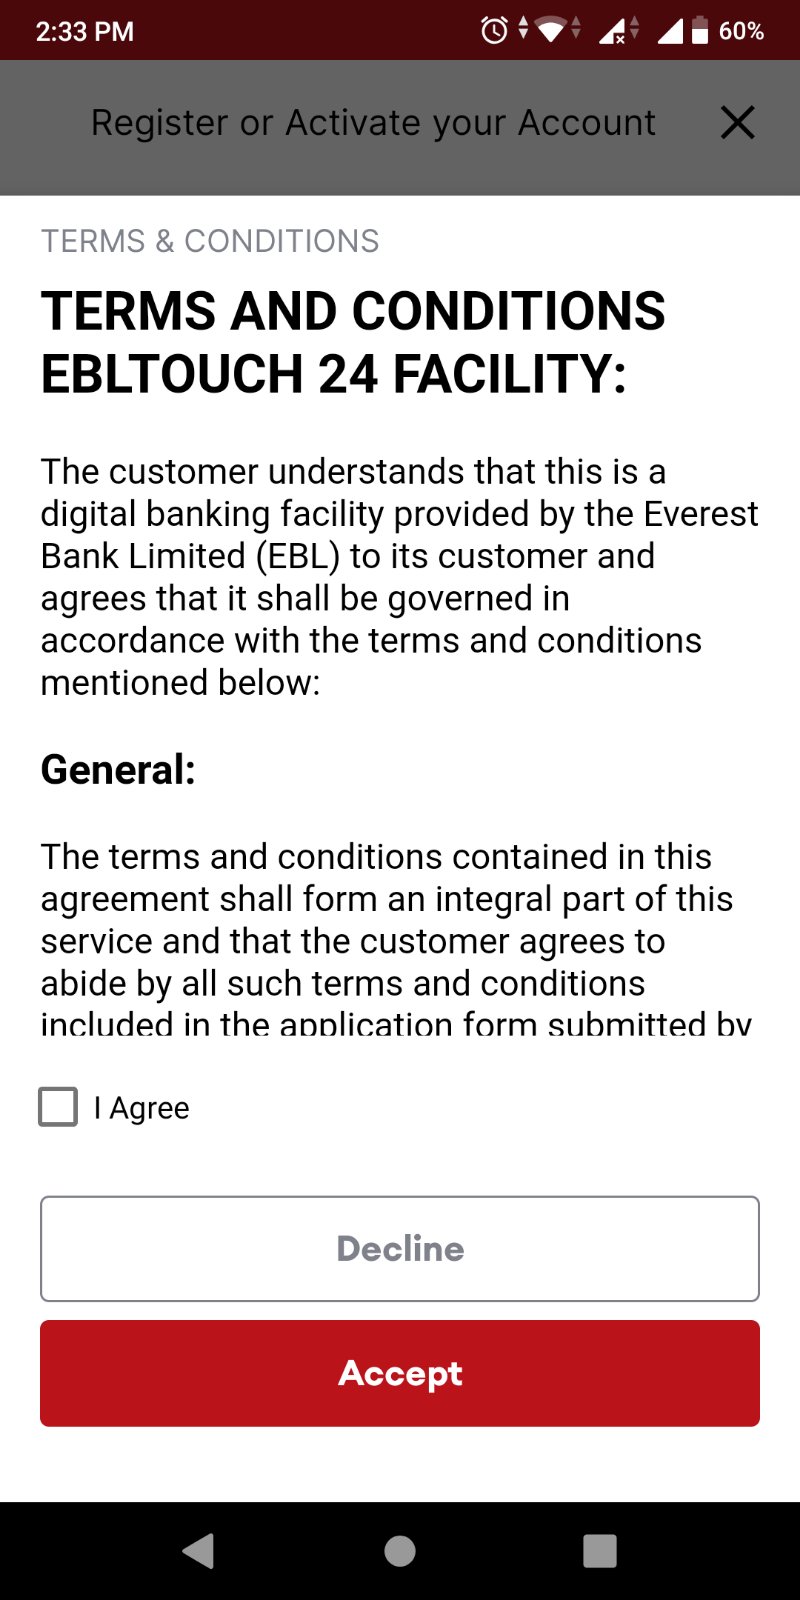 Accept Terms & Conditions - Image